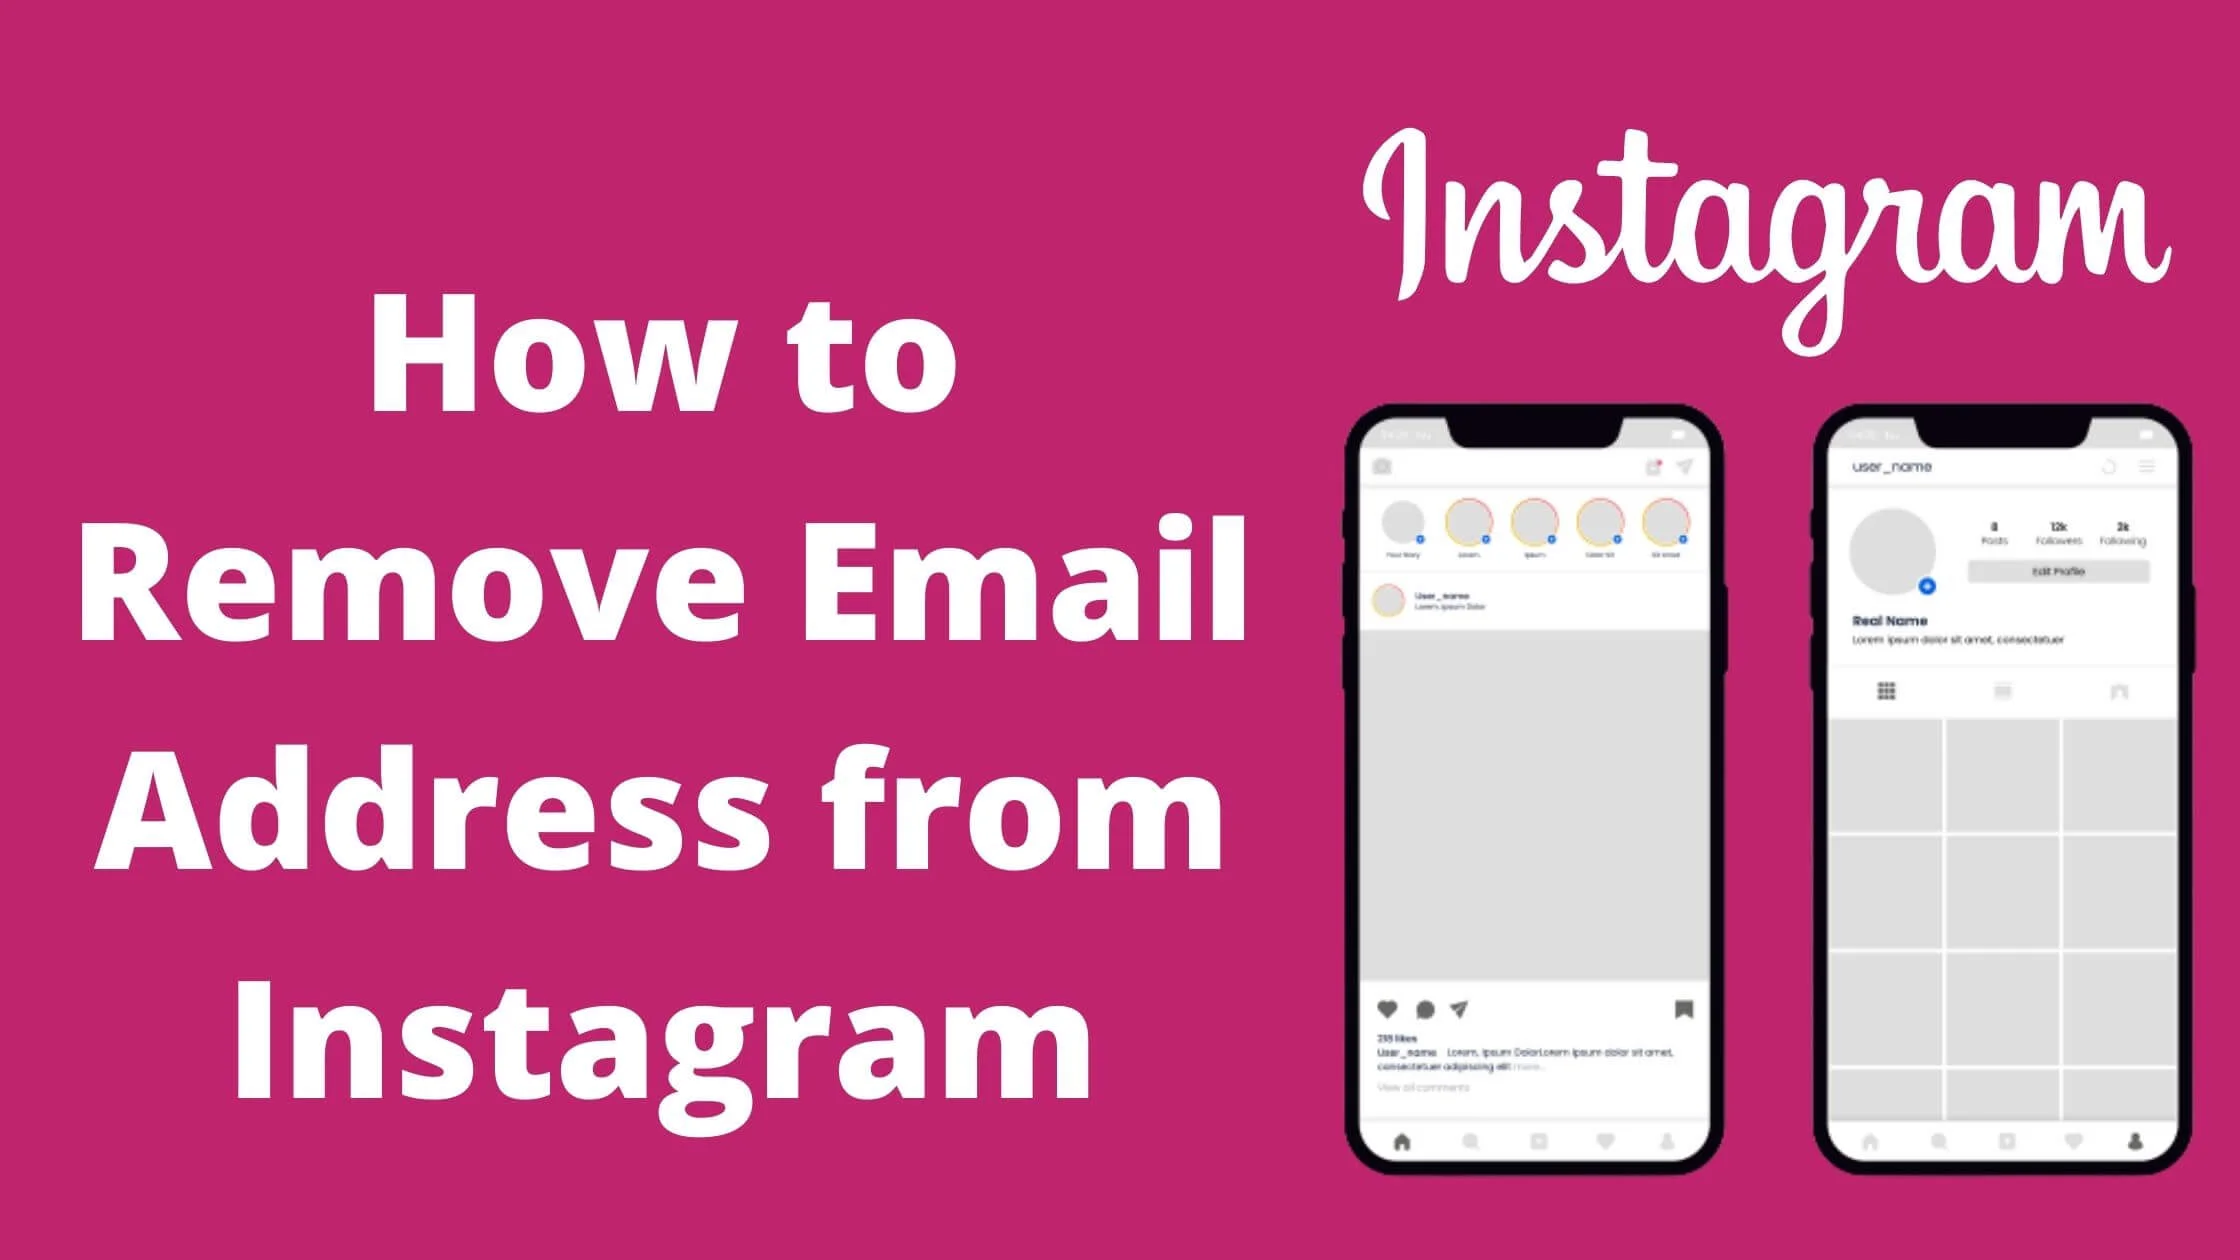 How to Remove Email Address from Instagram